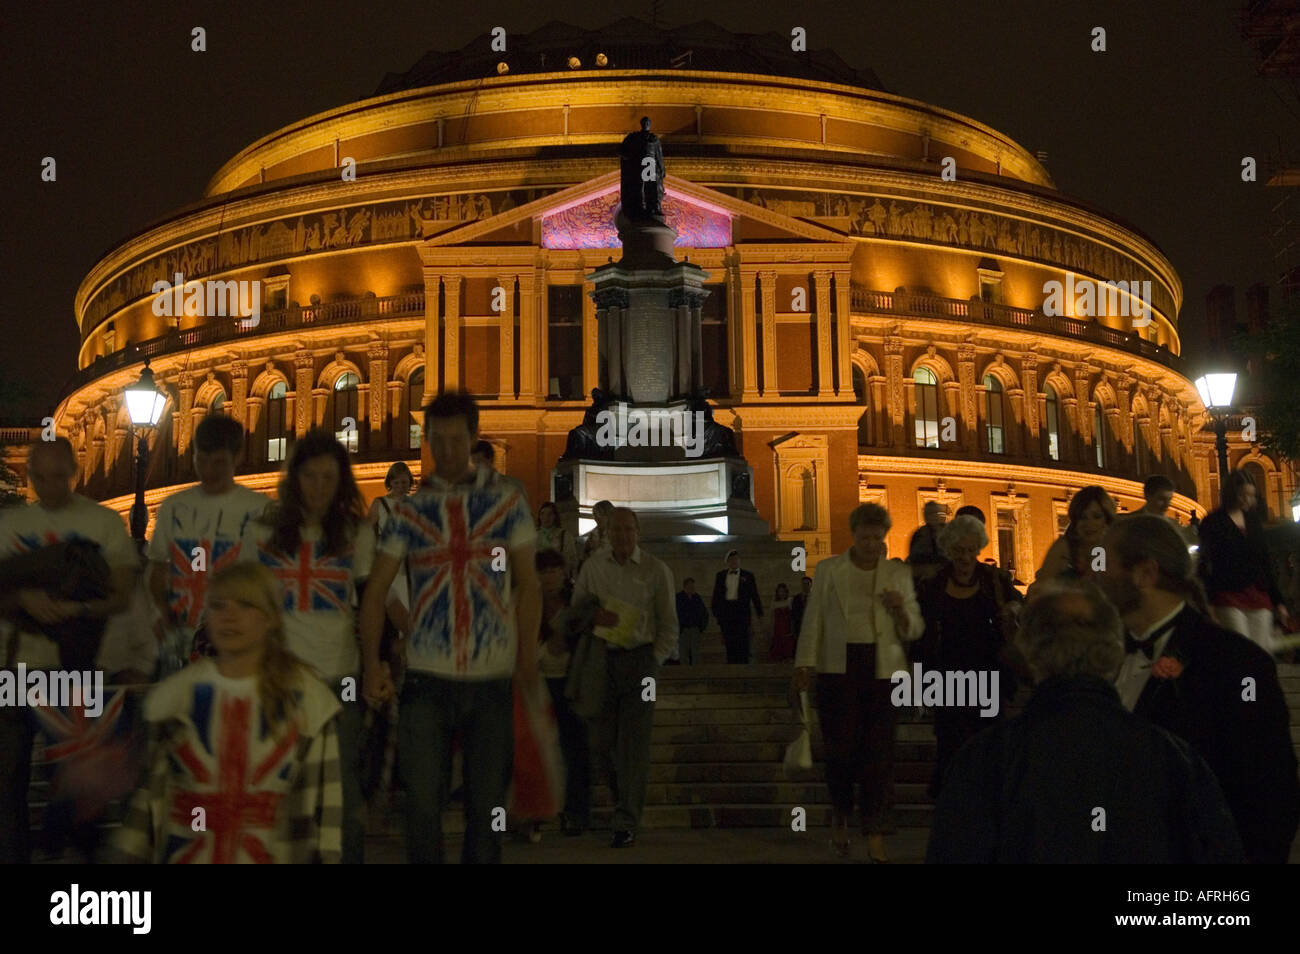 The Last Night of the Proms The Royal Albert Hall South Kensington London UK The Henry Wood Promenade Concerts HOMER SYKES Stock Photo